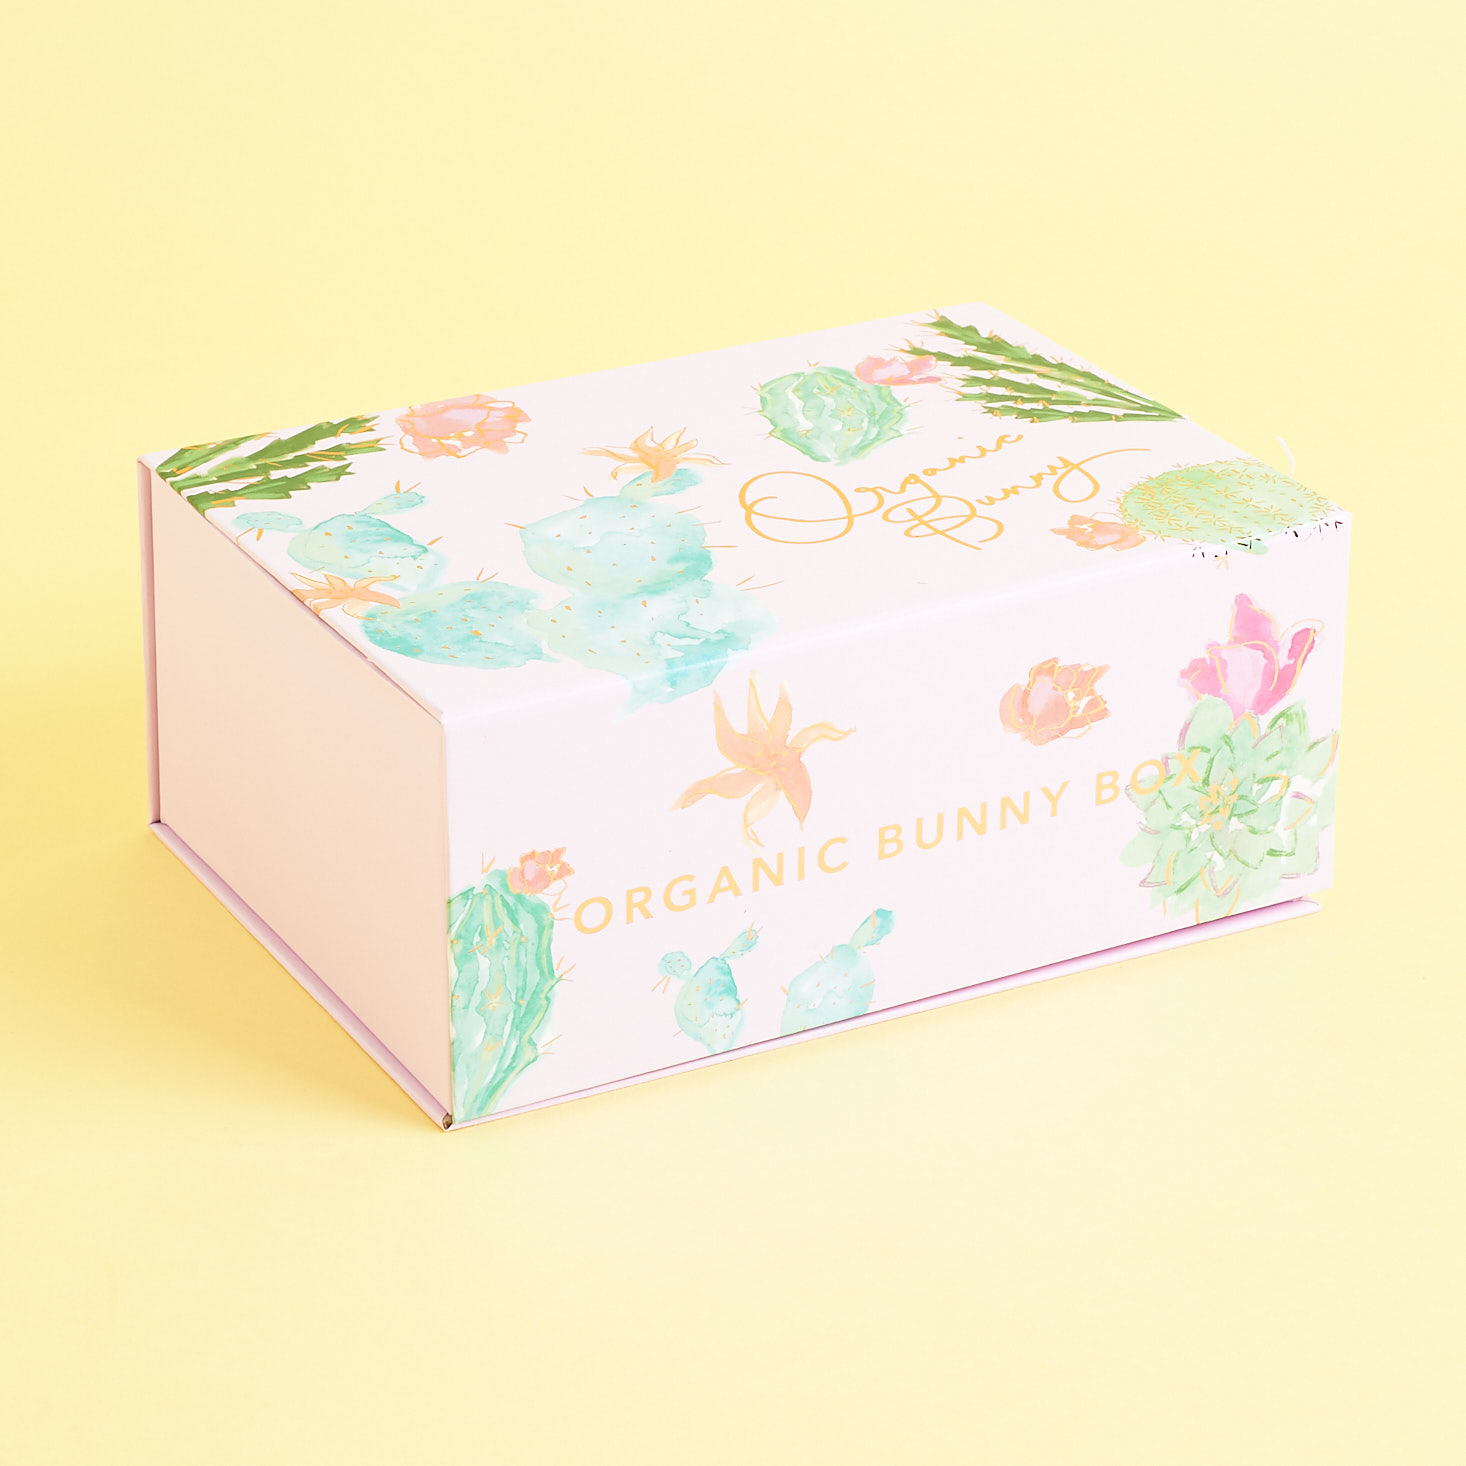 The Organic Bunny Box Review – August 2019